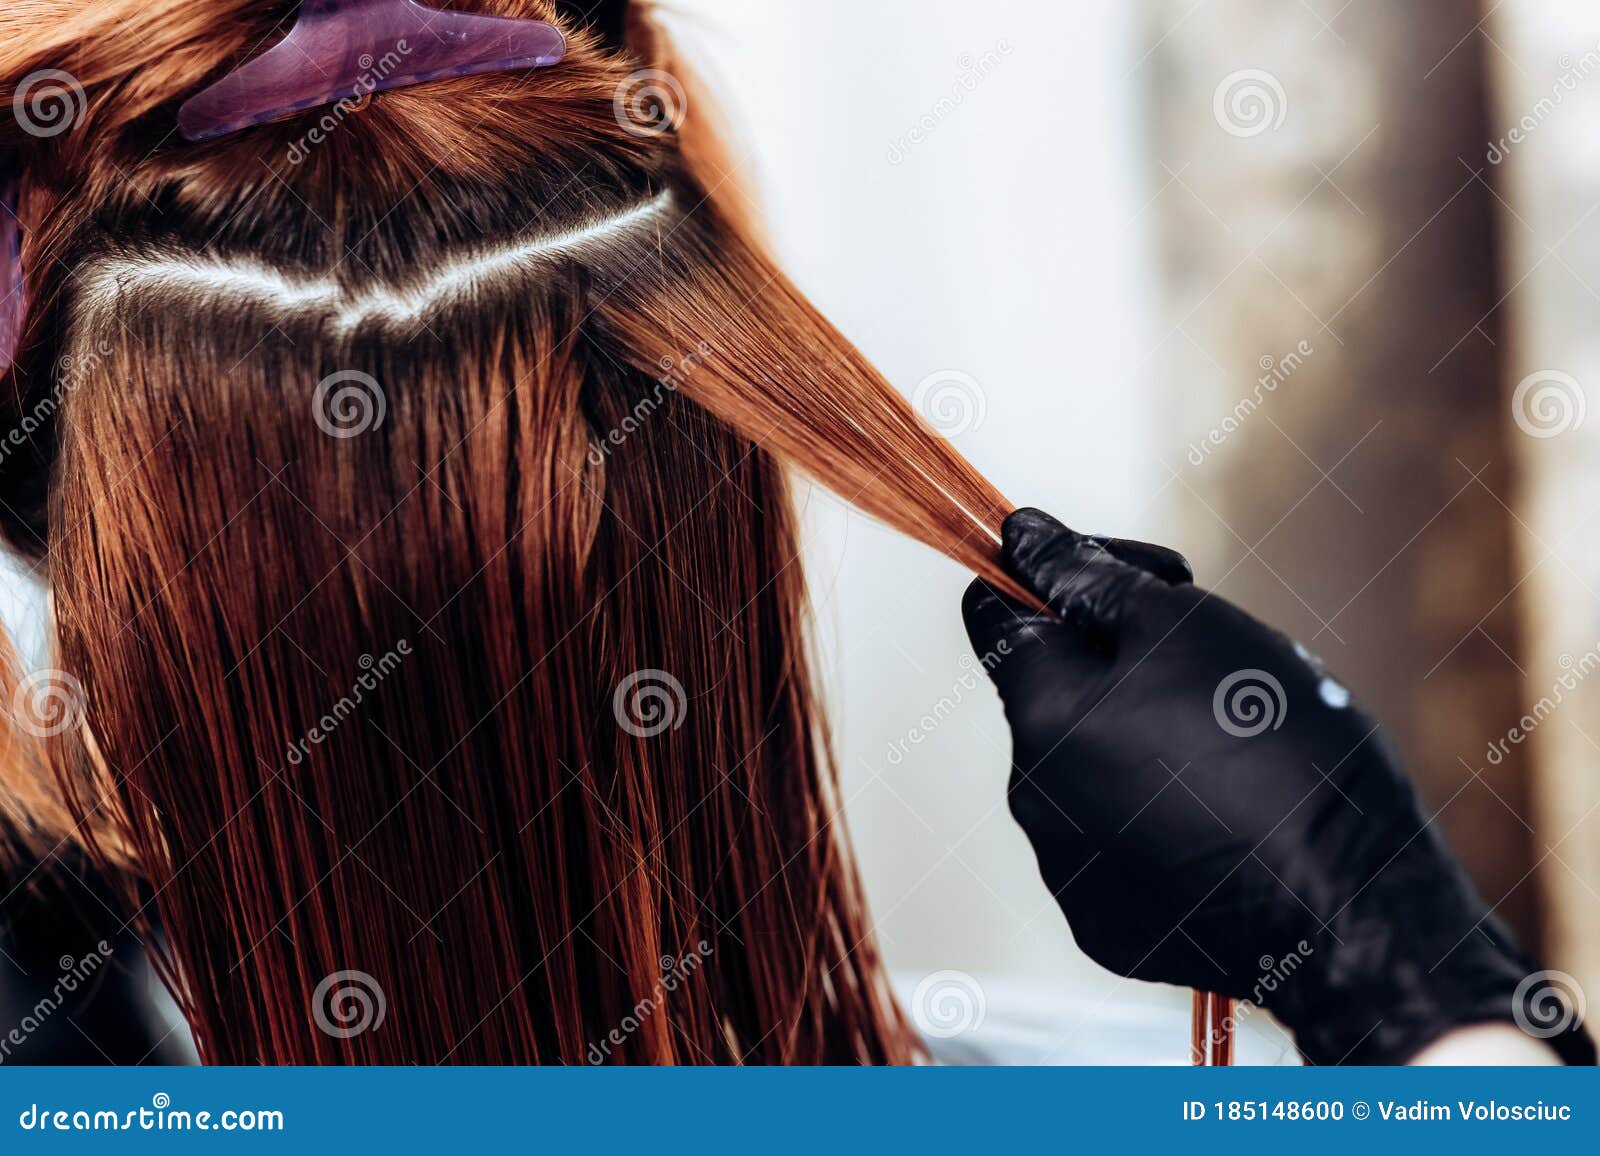 Hairdresser Applies a Hair Mask To the Woman in the Beauty Salon. Botox and  Keratin Hair Straightening Procedure Stock Photo - Image of home,  preparation: 185148600